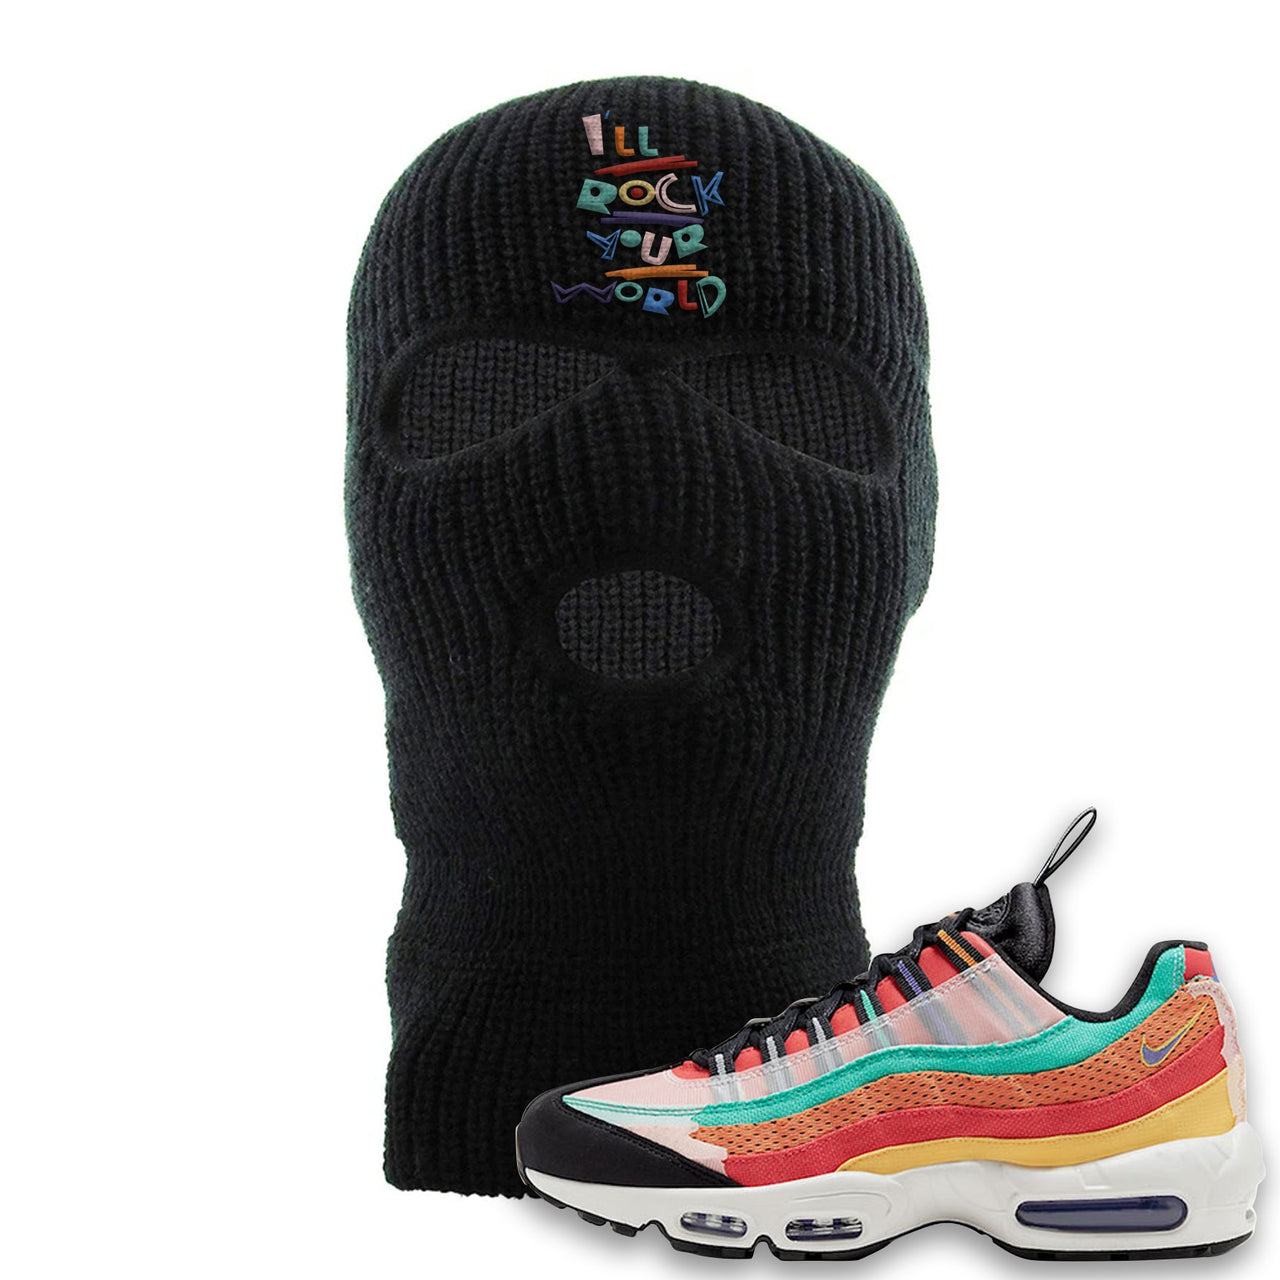 Air Max 95 Black History Month Sneaker Black Ski Mask | Winter Mask to match Air Max 95 Black History Month Shoes | I'll Rock Your World